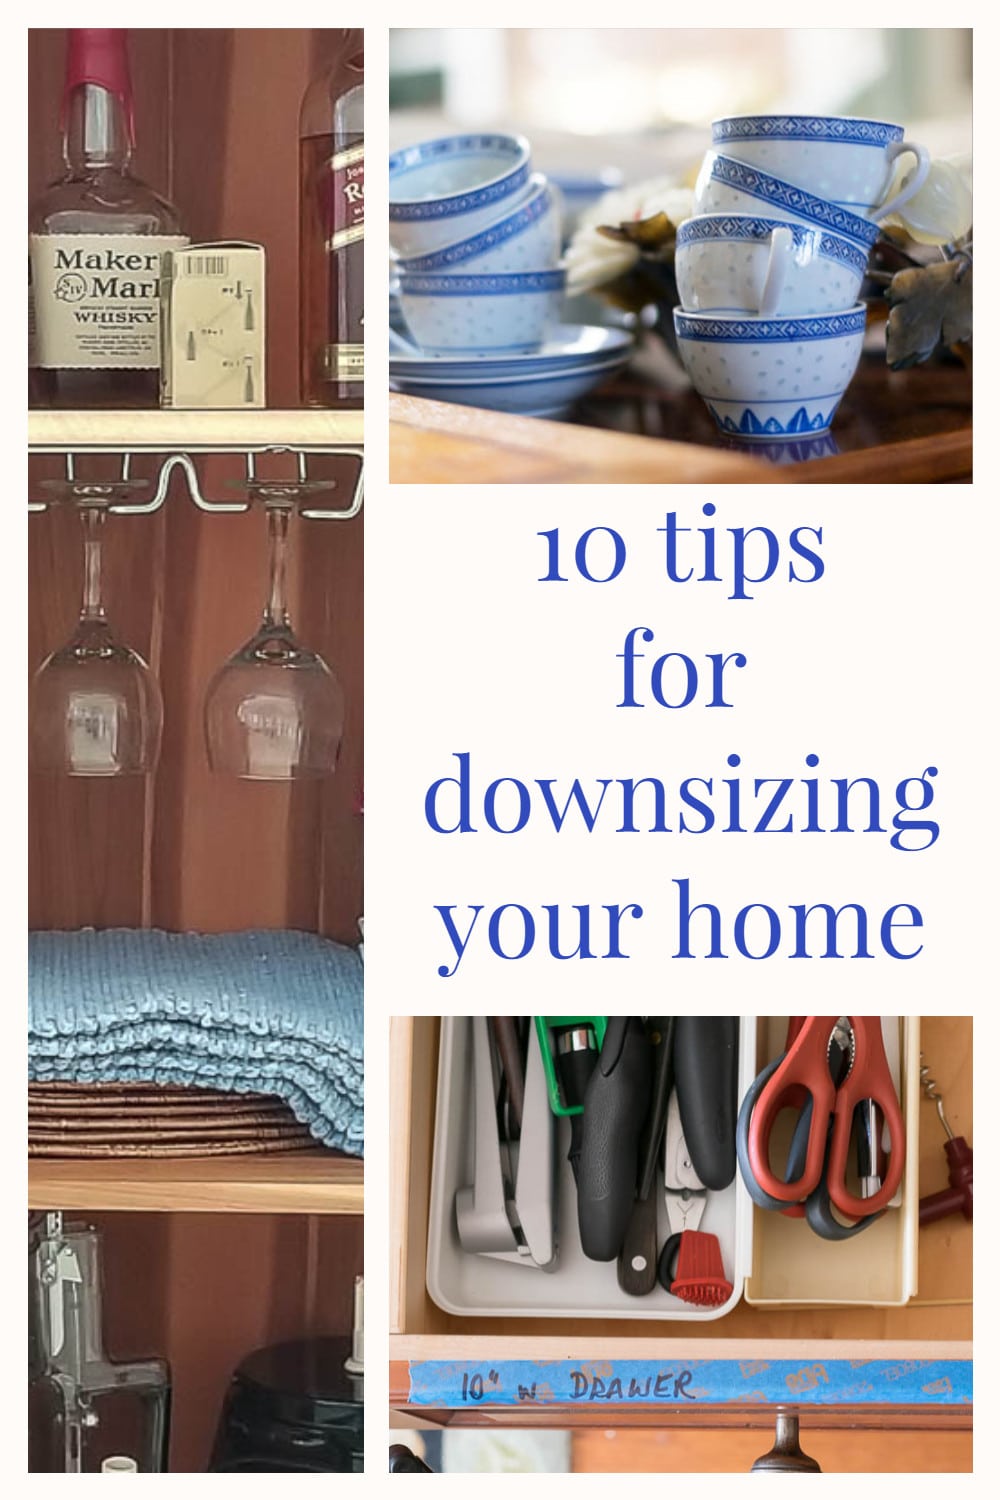 image of cups, labels on drawer and wine rack for 10 downsizing tips